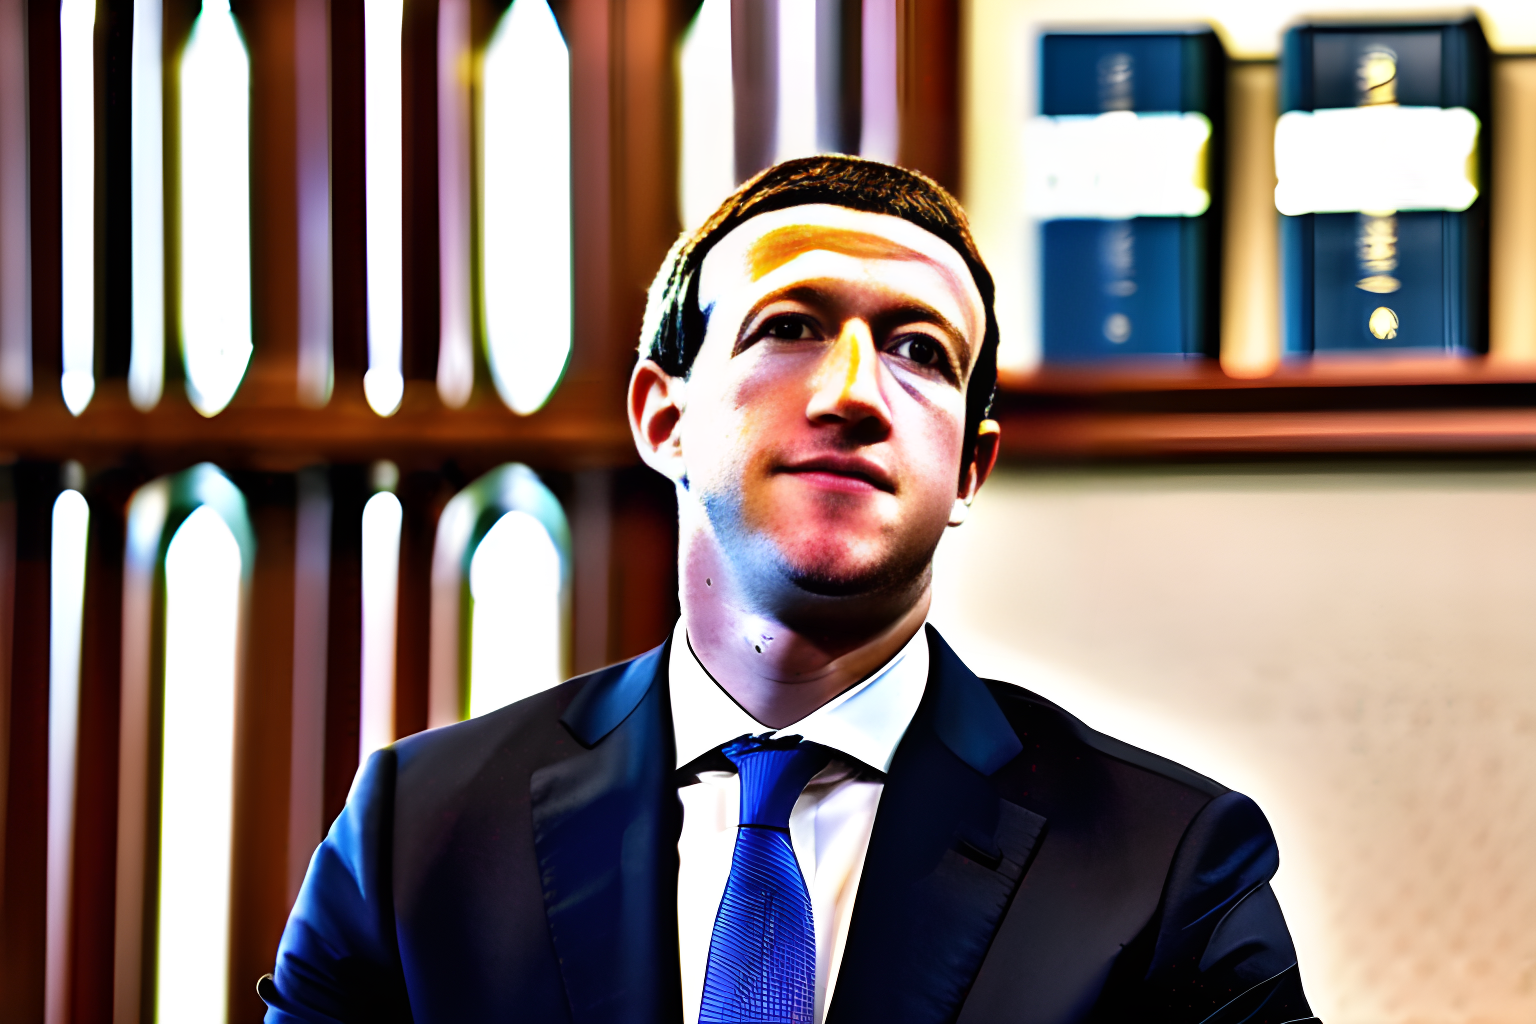 mark zuckerberg sweating in a court of law